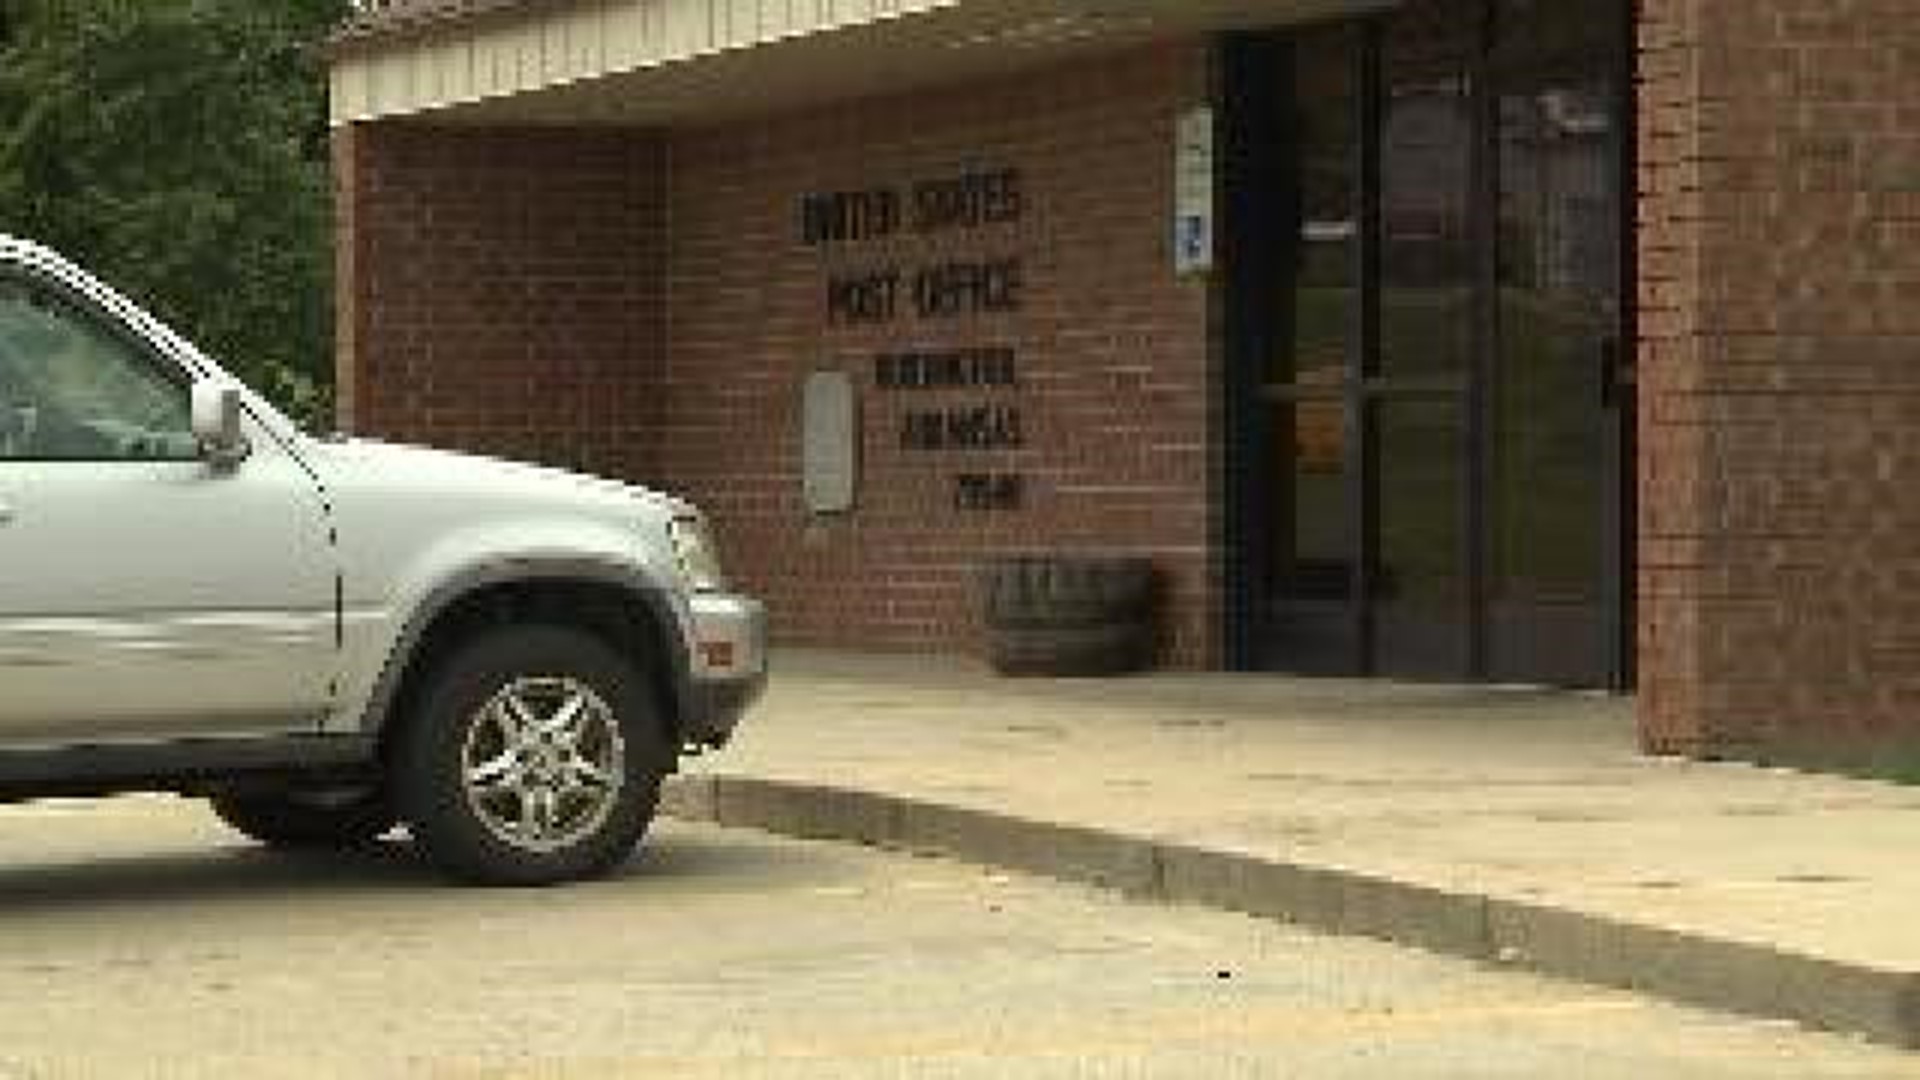 Local Town Concerned About Its Post Office Closing